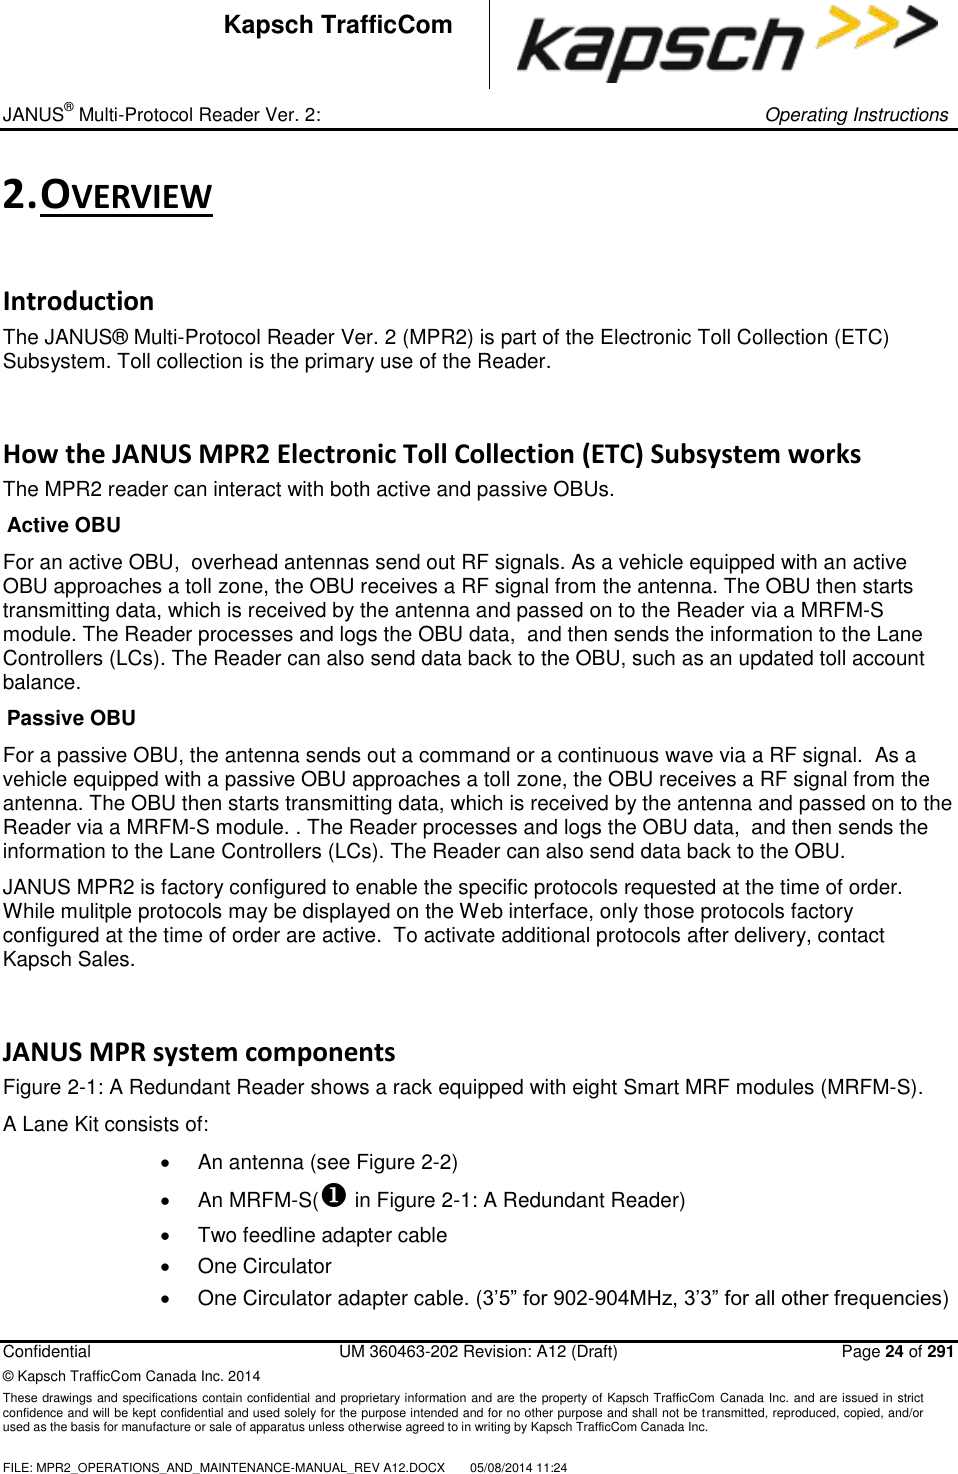 _ JANUS® Multi-Protocol Reader Ver. 2:     Operating Instructions  Confidential  UM 360463-202 Revision: A12 (Draft)   Page 24 of 291 © Kapsch TrafficCom Canada Inc. 2014 These drawings and specifications contain confidential and proprietary information and are the property of Kapsch TrafficCom  Canada Inc. and are issued in strict confidence and will be kept confidential and used solely for the purpose intended and for no other purpose and shall not be transmitted, reproduced, copied, and/or used as the basis for manufacture or sale of apparatus unless otherwise agreed to in writing by Kapsch TrafficCom Canada Inc.  FILE: MPR2_OPERATIONS_AND_MAINTENANCE-MANUAL_REV A12.DOCX  05/08/2014 11:24  Kapsch TrafficCom 2. OVERVIEW Introduction The JANUS® Multi-Protocol Reader Ver. 2 (MPR2) is part of the Electronic Toll Collection (ETC) Subsystem. Toll collection is the primary use of the Reader. How the JANUS MPR2 Electronic Toll Collection (ETC) Subsystem works The MPR2 reader can interact with both active and passive OBUs. Active OBU For an active OBU,  overhead antennas send out RF signals. As a vehicle equipped with an active OBU approaches a toll zone, the OBU receives a RF signal from the antenna. The OBU then starts transmitting data, which is received by the antenna and passed on to the Reader via a MRFM-S module. The Reader processes and logs the OBU data,  and then sends the information to the Lane Controllers (LCs). The Reader can also send data back to the OBU, such as an updated toll account balance. Passive OBU For a passive OBU, the antenna sends out a command or a continuous wave via a RF signal.  As a vehicle equipped with a passive OBU approaches a toll zone, the OBU receives a RF signal from the antenna. The OBU then starts transmitting data, which is received by the antenna and passed on to the Reader via a MRFM-S module. . The Reader processes and logs the OBU data,  and then sends the information to the Lane Controllers (LCs). The Reader can also send data back to the OBU.  JANUS MPR2 is factory configured to enable the specific protocols requested at the time of order.  While mulitple protocols may be displayed on the Web interface, only those protocols factory configured at the time of order are active.  To activate additional protocols after delivery, contact Kapsch Sales.  JANUS MPR system components Figure 2-1: A Redundant Reader shows a rack equipped with eight Smart MRF modules (MRFM-S). A Lane Kit consists of:    An antenna (see Figure 2-2)   An MRFM-S( in Figure 2-1: A Redundant Reader)   Two feedline adapter cable   One Circulator   One Circulator adapter cable. (3’5” for 902-904MHz, 3’3” for all other frequencies) 